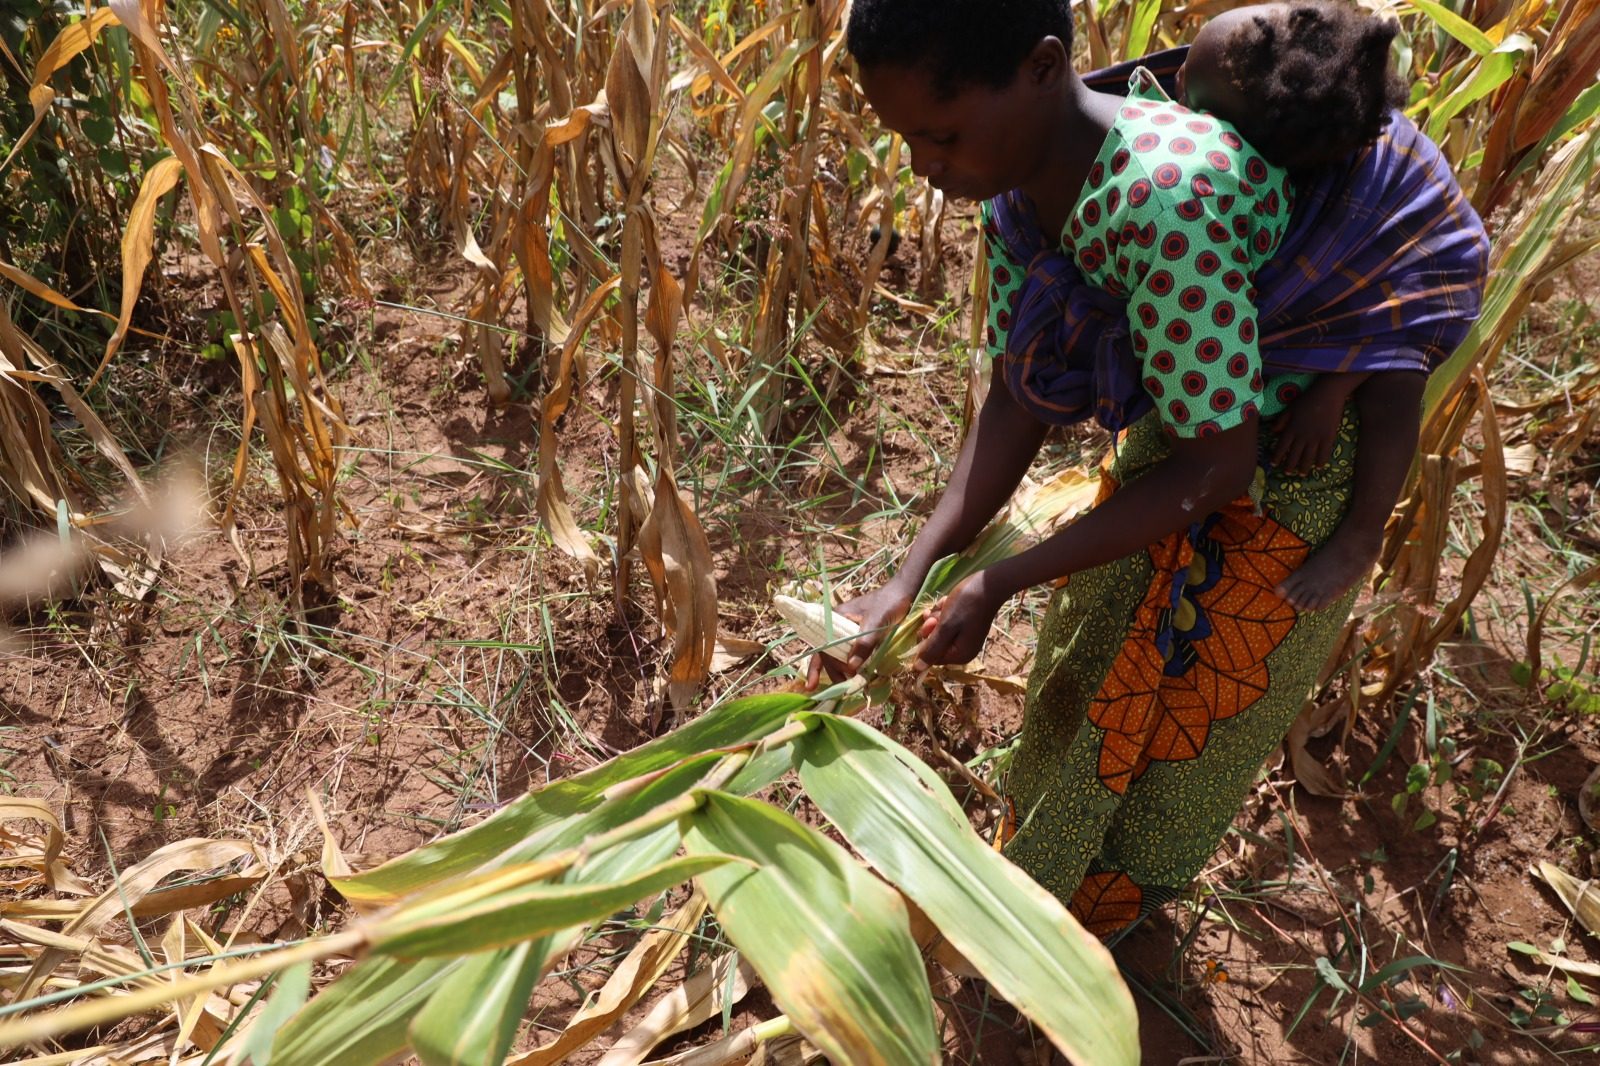 A woman is working in a maize field.